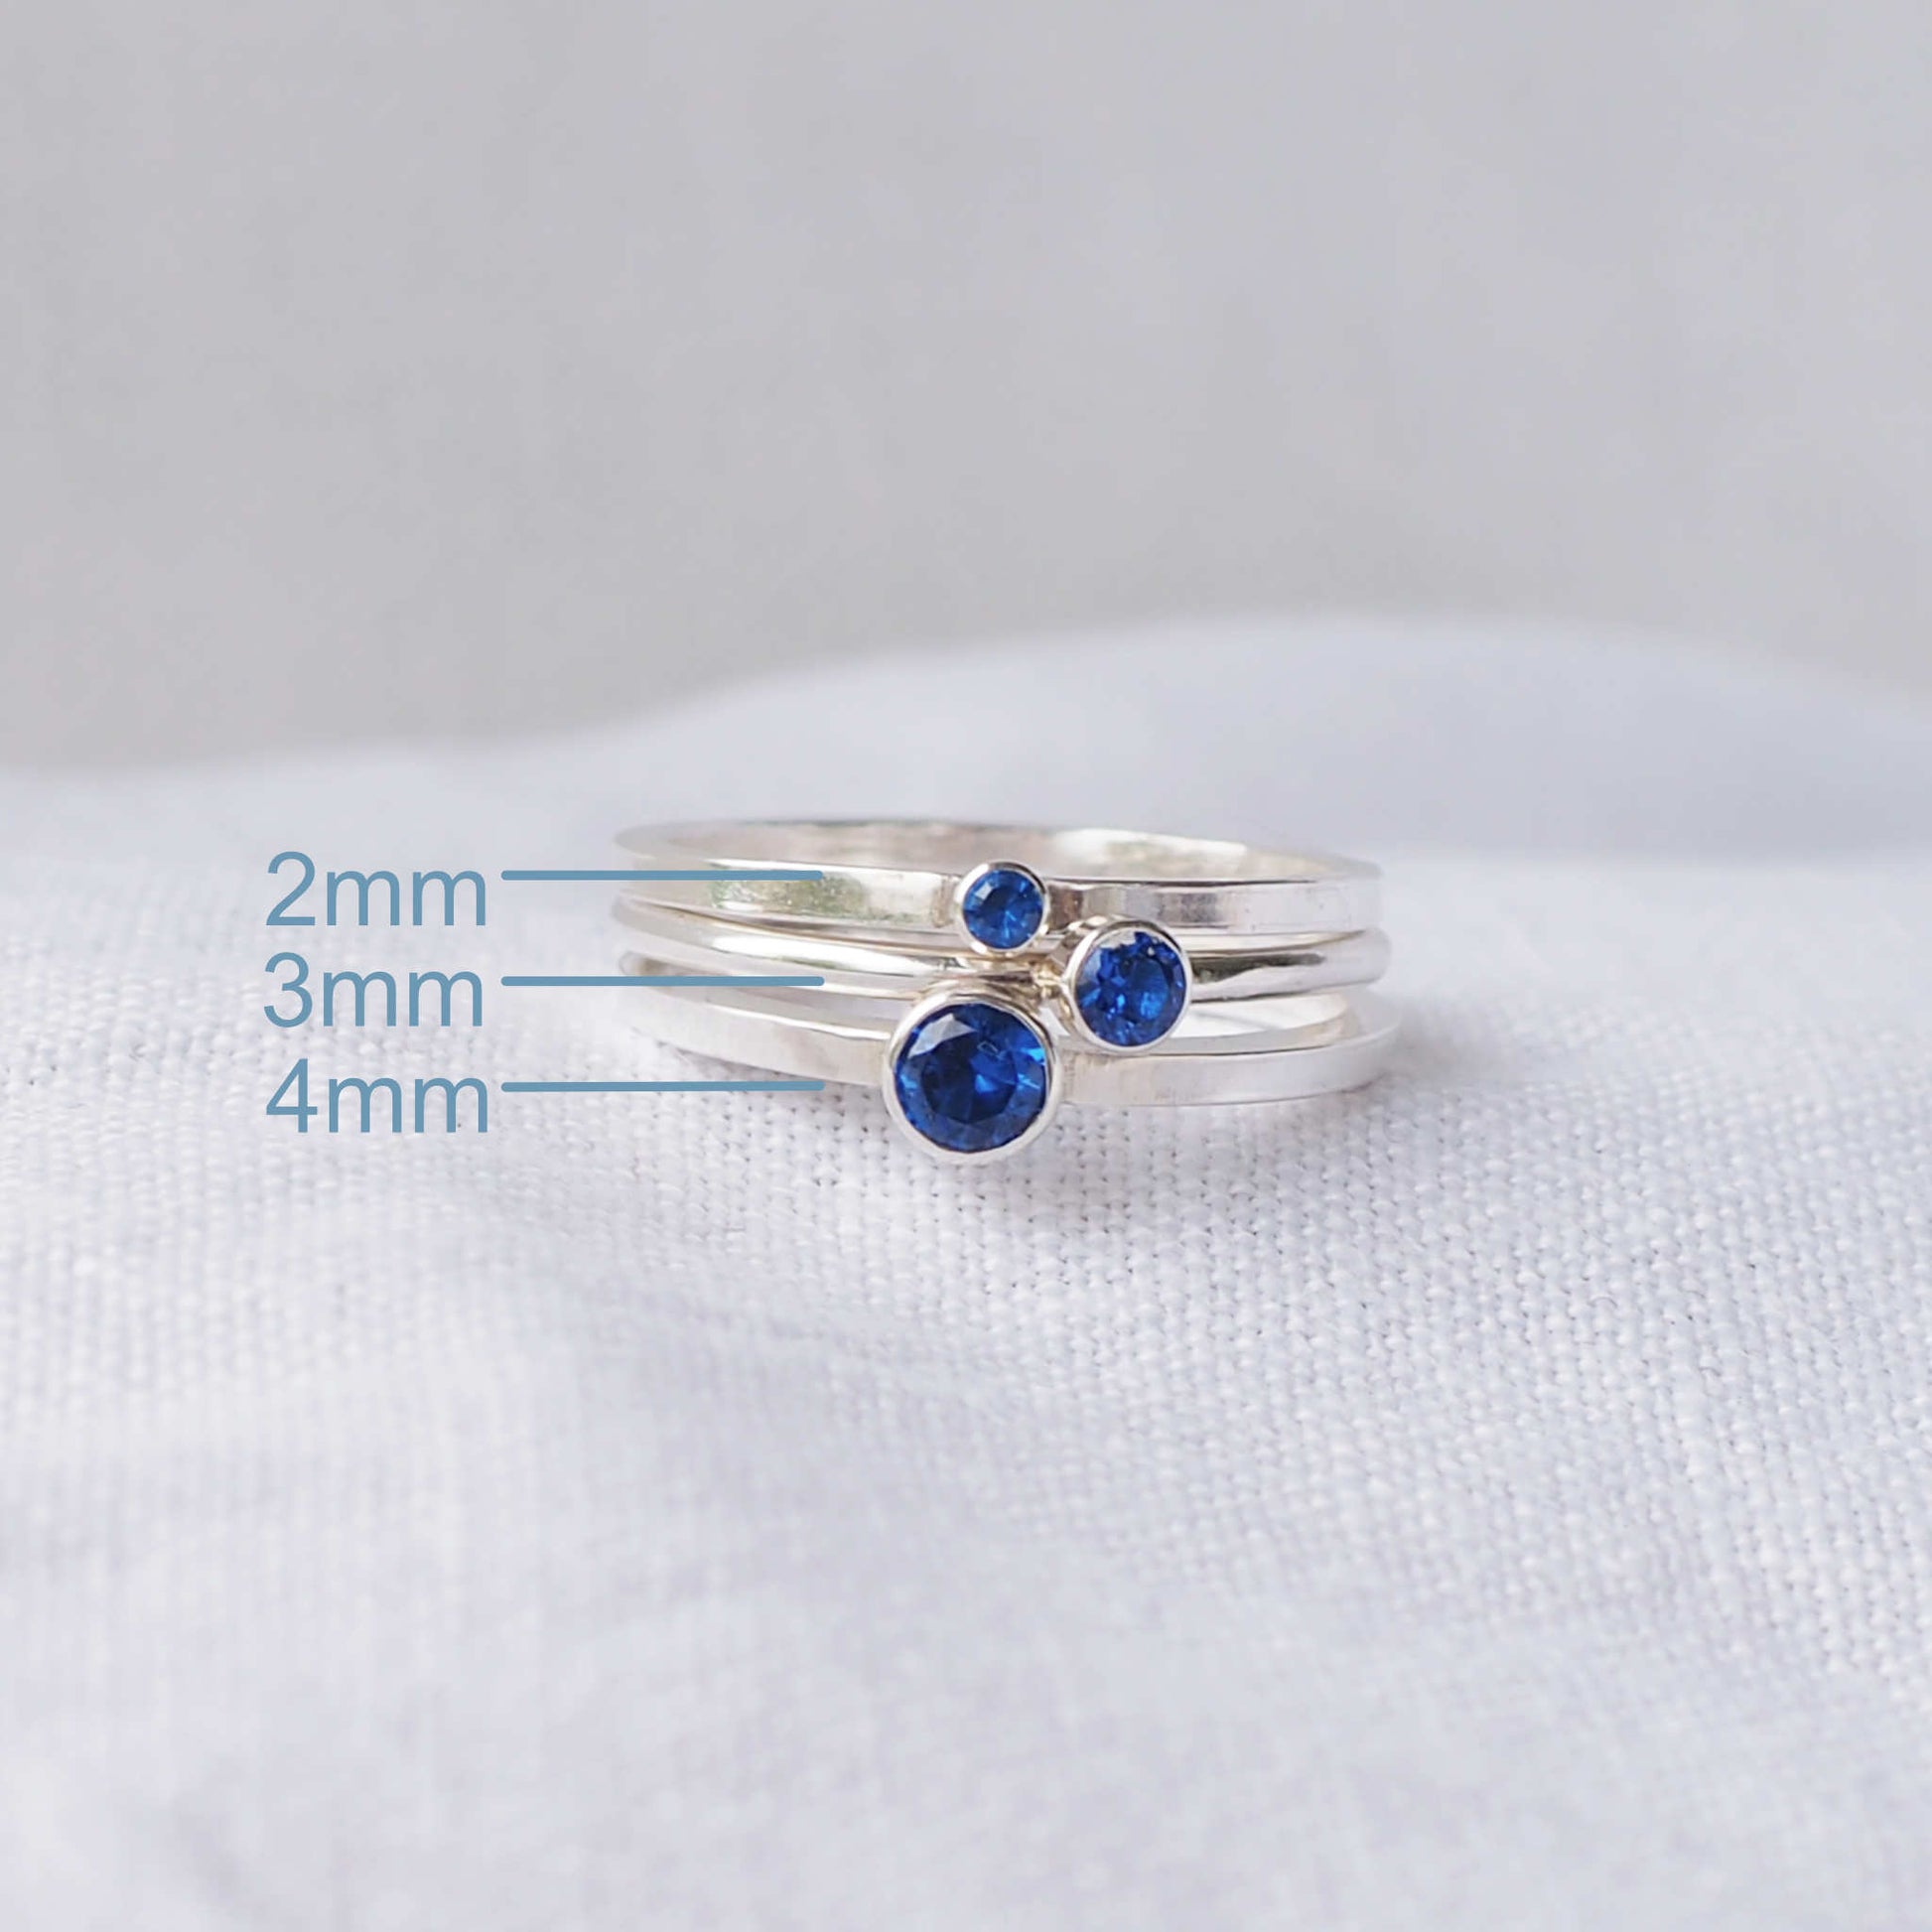 Three rings showing the square and round band styles with three different sized Cubic Zirconia in a Blue Sapphire colour. The rings are made from Sterling Silver and a round blue cubic zirconia measuring 2,3 or 4mm in size. Handmade by maram jewellery in Scotland